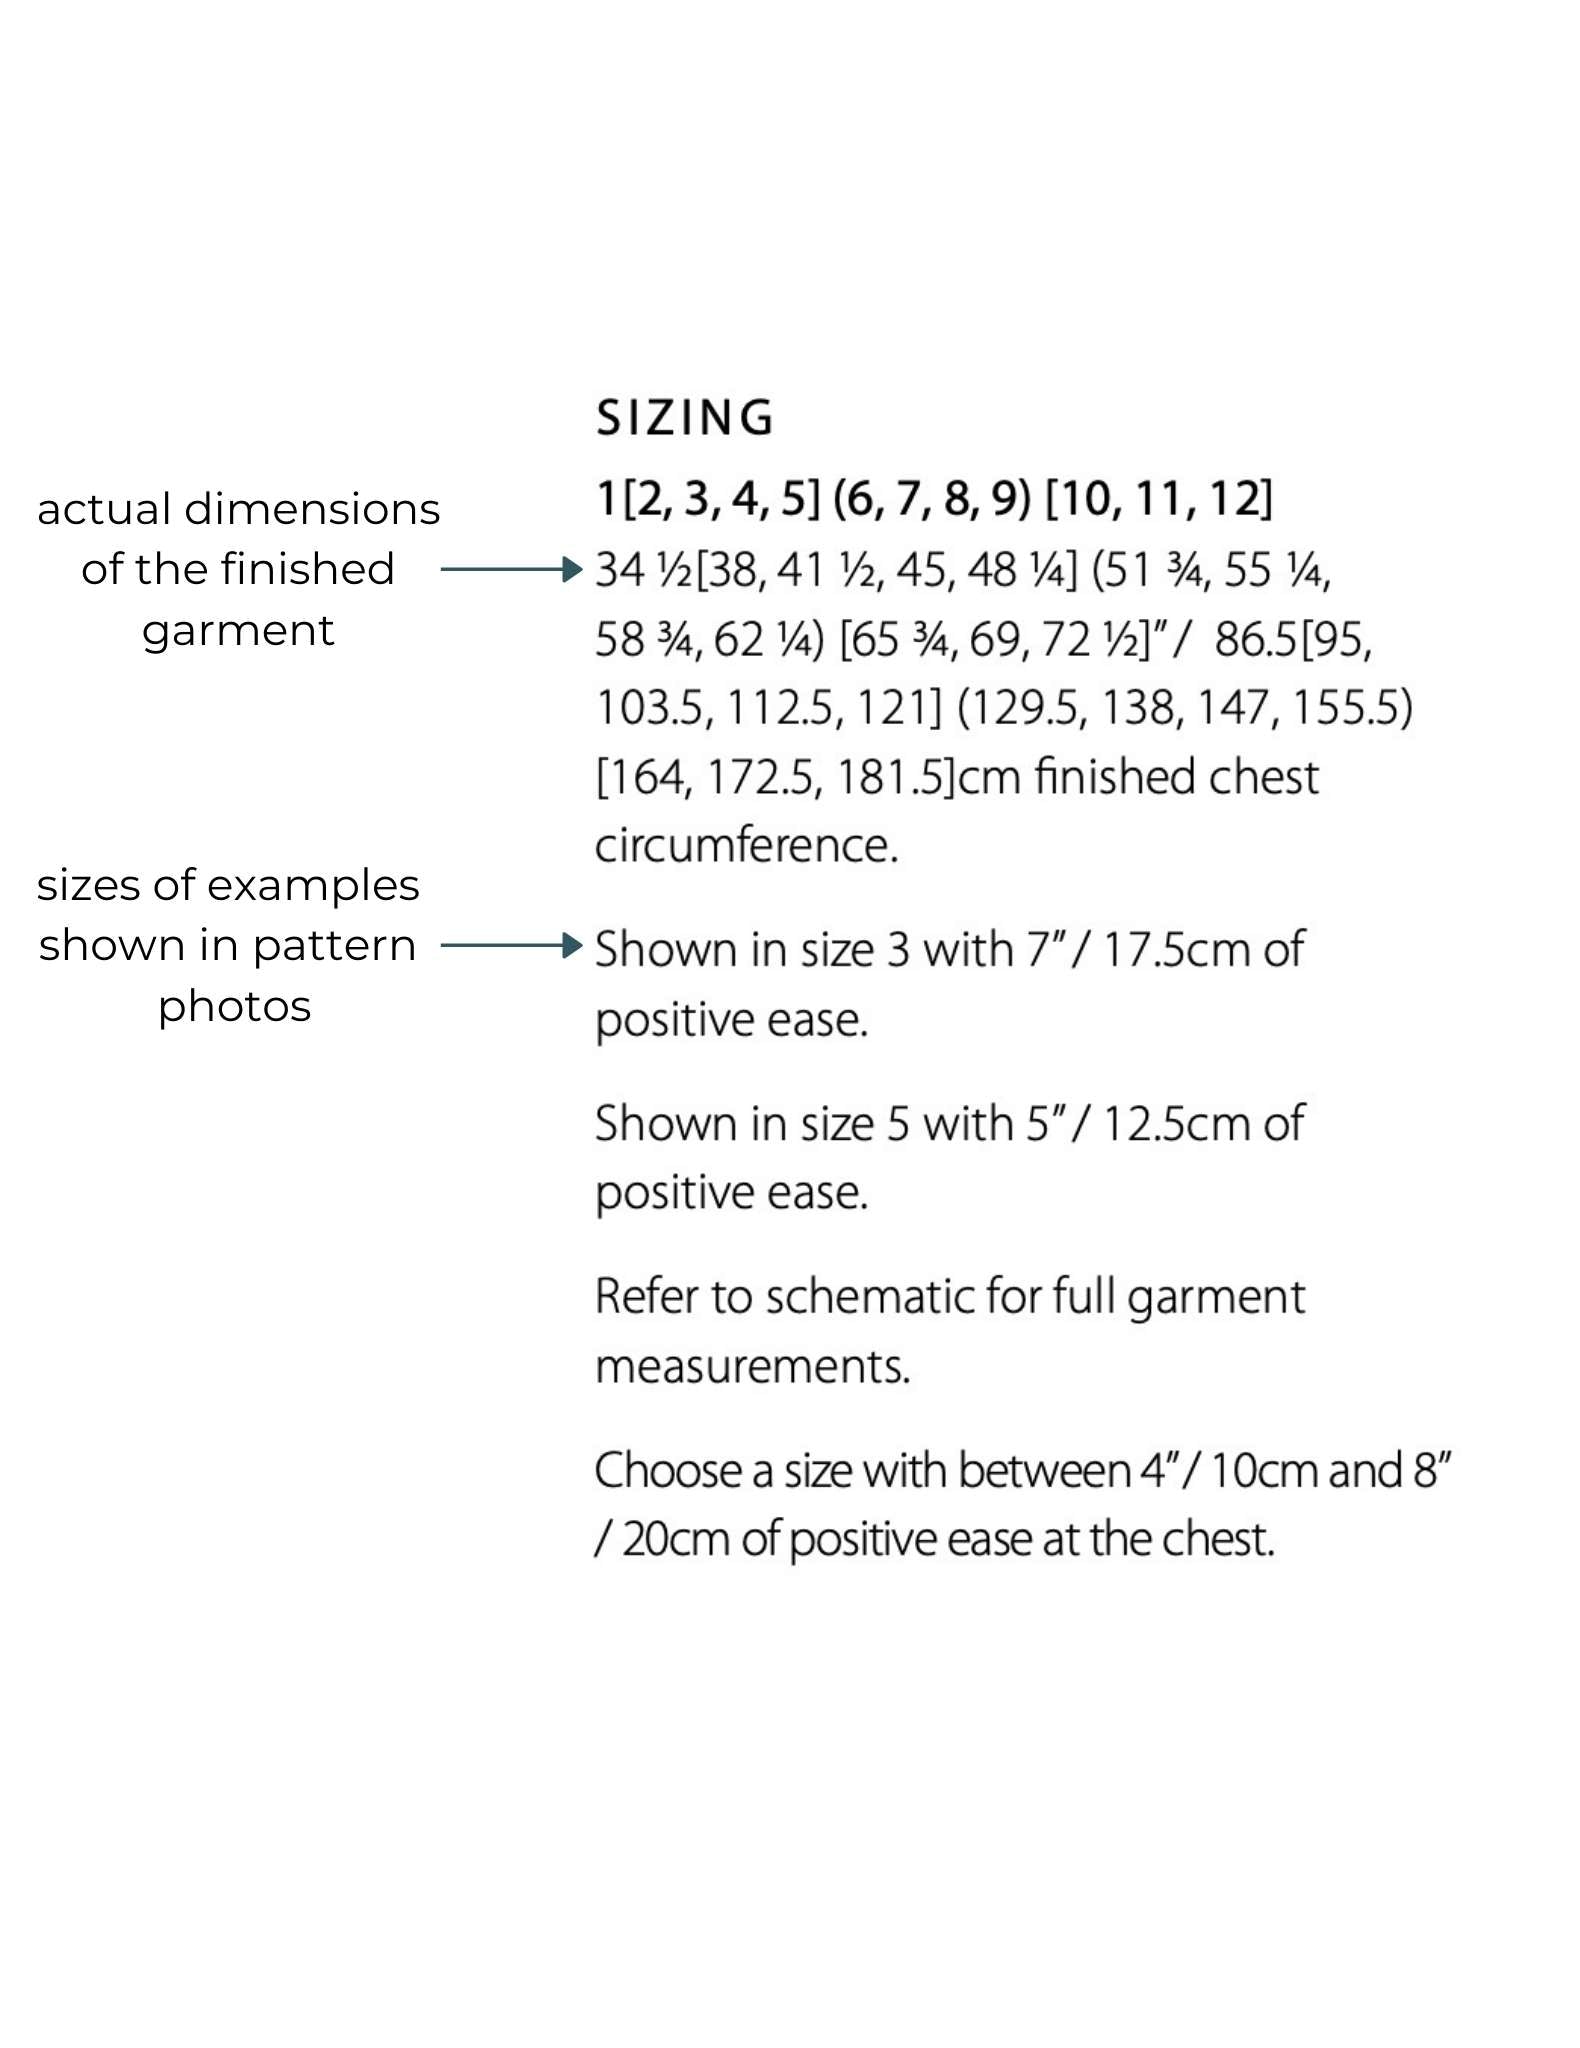 A screenshot of a knitting pattern showing the different sizes, and the sizes worn by models in the photos.